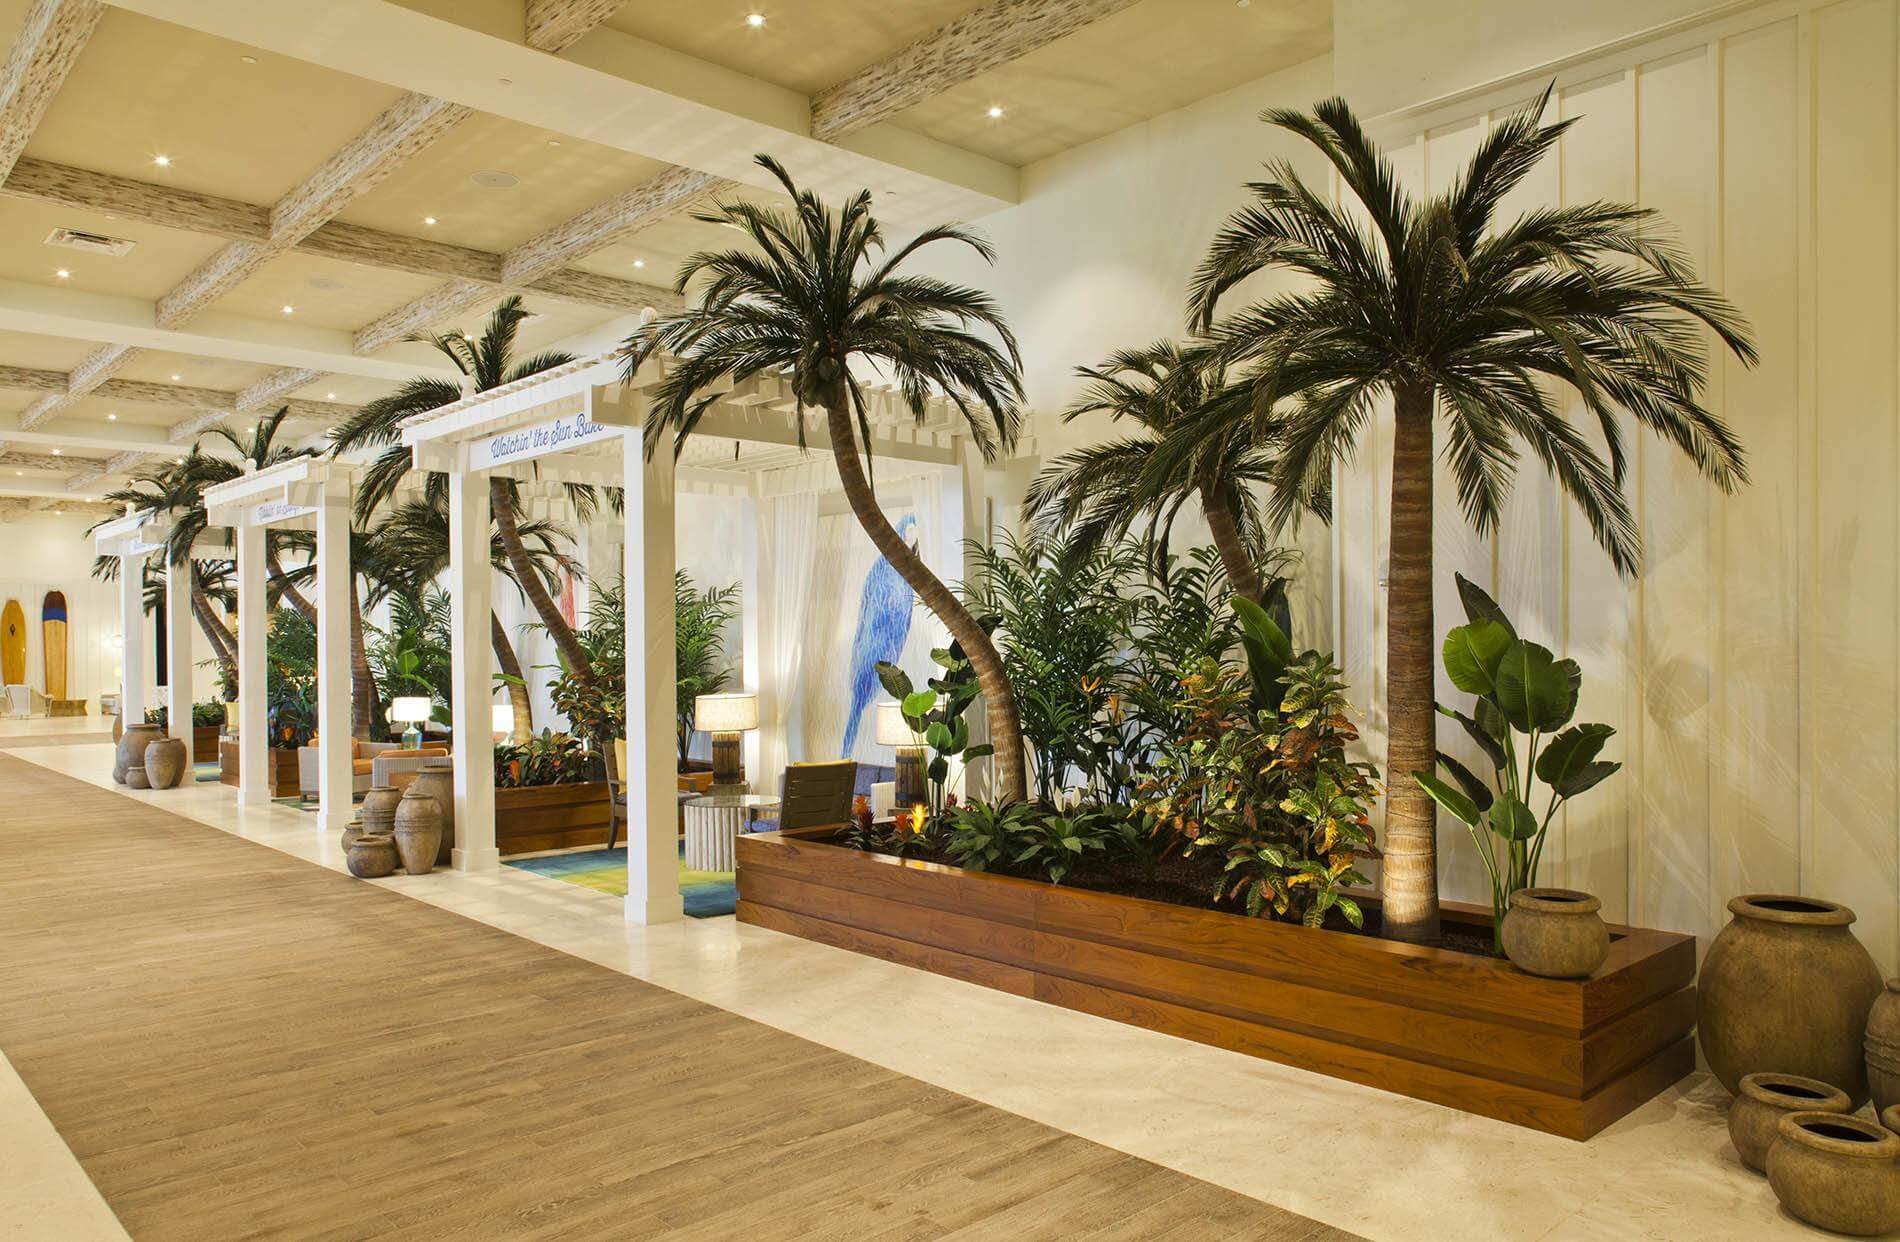 Fabricated Coconut Palm Trees lobby area view 2